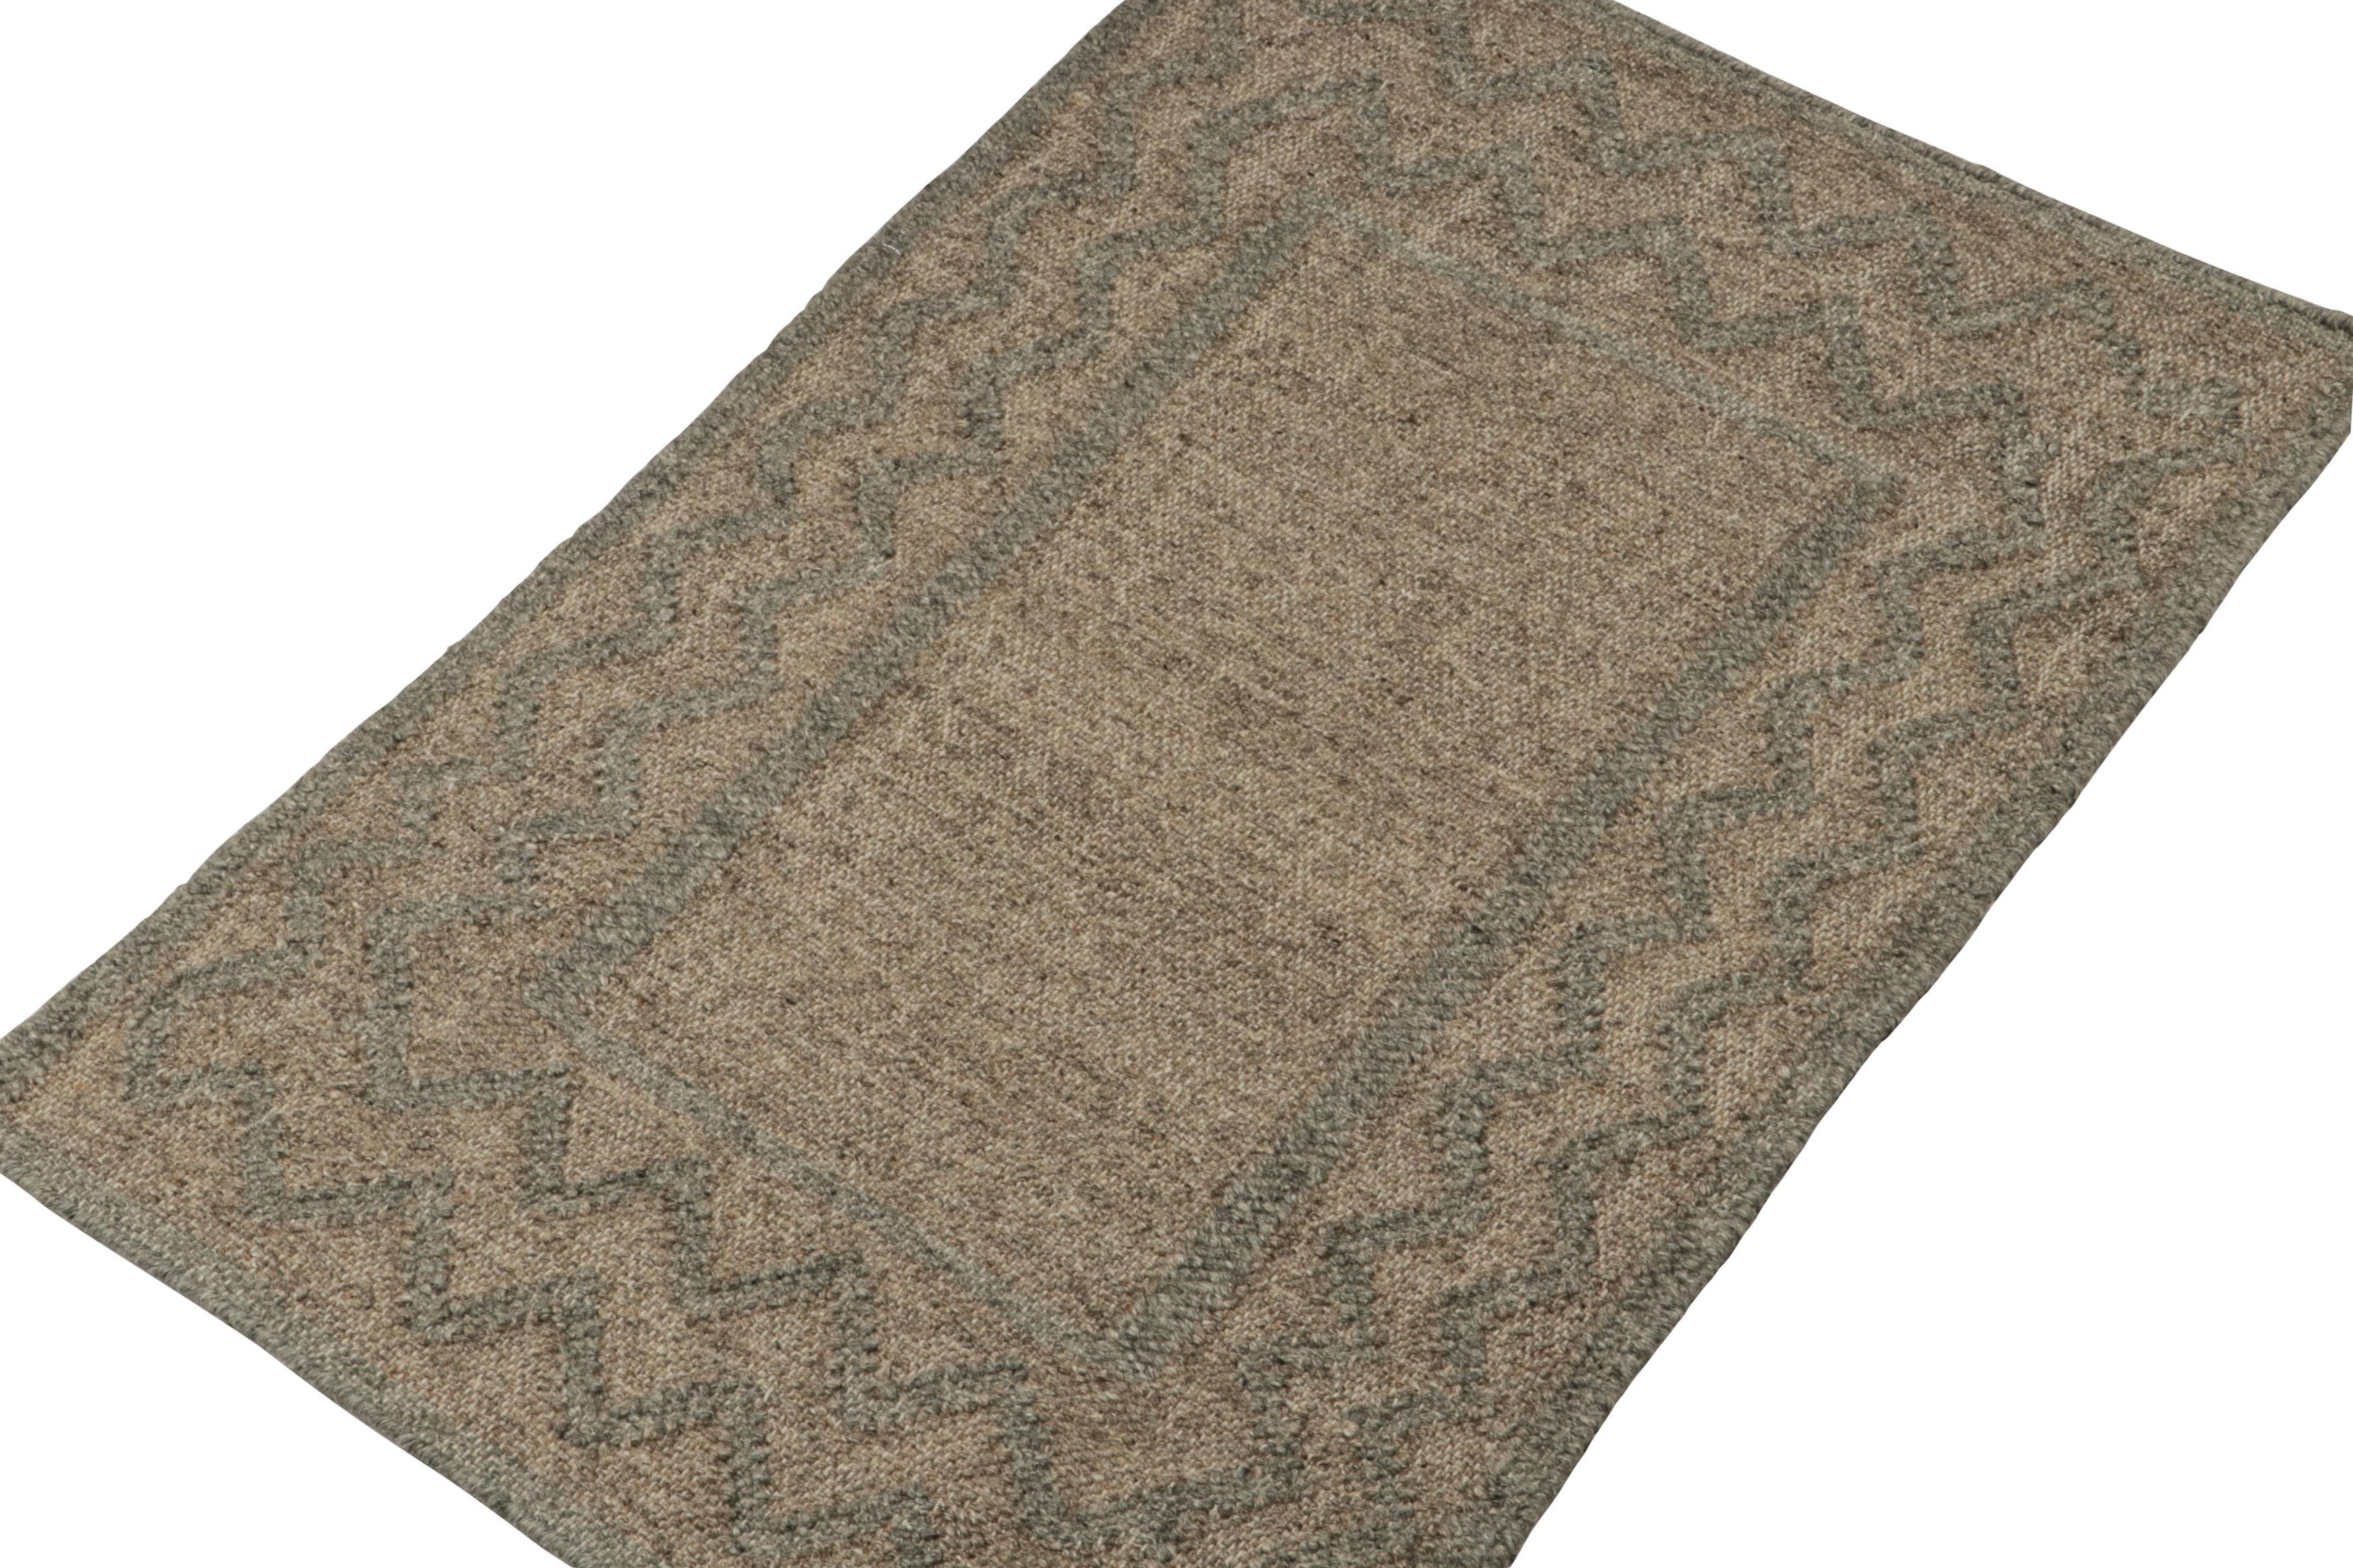 This 2x3 rug is a bold new addition to the flatweave collection by Rug & Kilim.  

On the Design: 

Handwoven in wool & cotton, this contemporary kilim carries geometric patterns in brown and grey. Further enjoying a comfortable aesthetic appeal, a